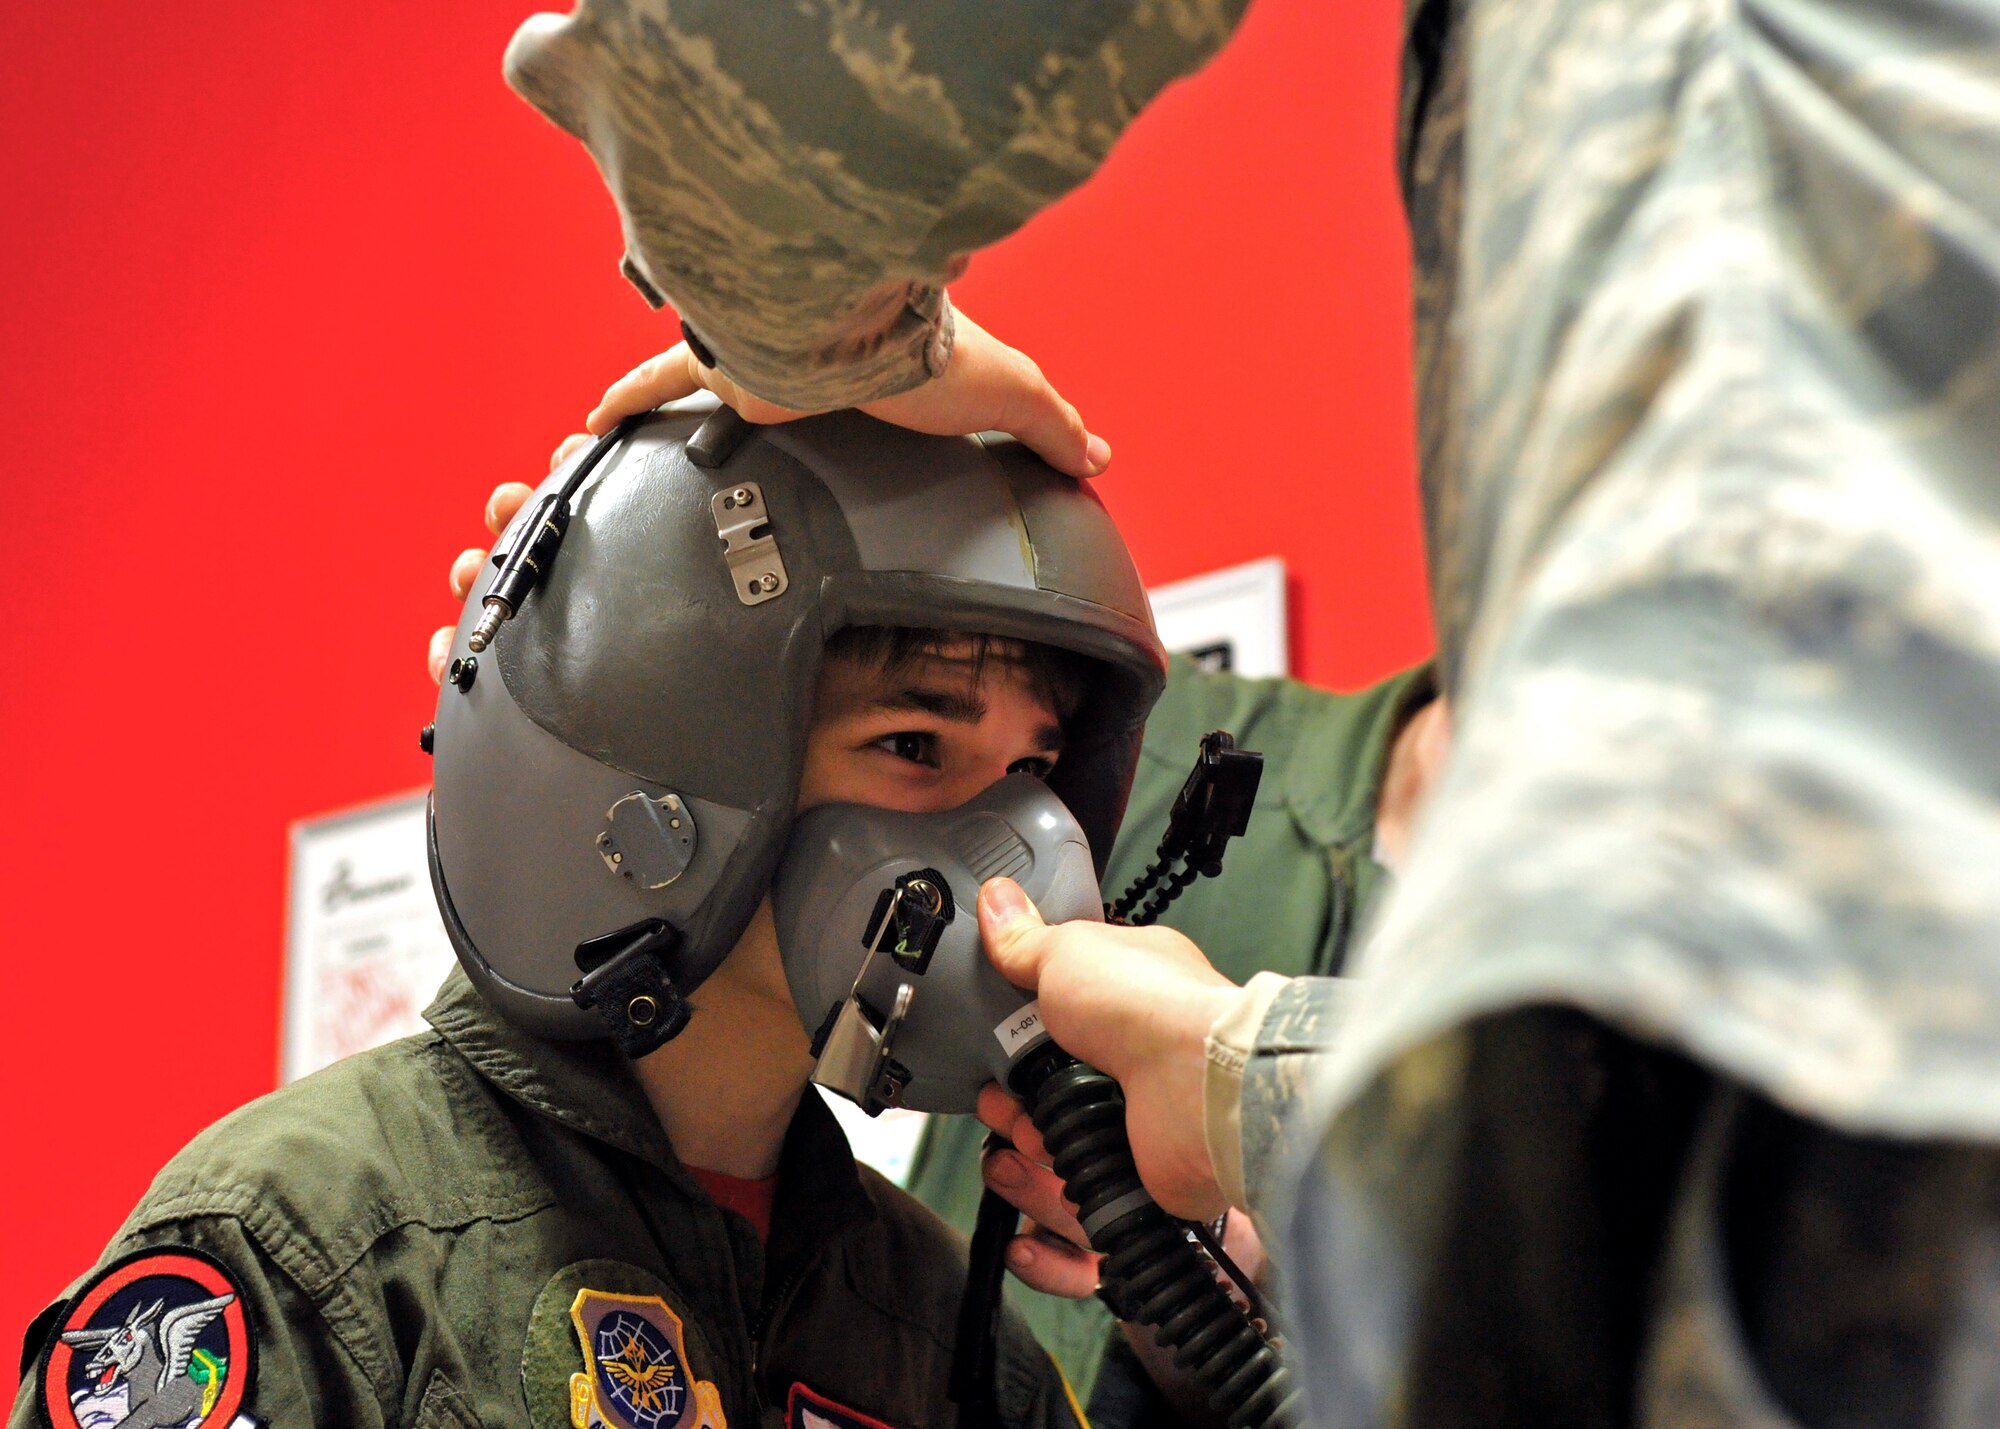 Stillen Rivera, Team McChord’s newest “Pilot for a Day” participant, gets the pilot treatment during a visit to the 62nd Operations Support Squadron Aircrew Flight Equipment section, March 23, 2017 at Joint Base Lewis-McChord, Wash. The “Pilot for a Day” program has been hosted by Team McChord for the past several years, and seeks to fulfil the dreams of youth with limiting disabilities. (U.S. Air Force photo/Staff Sgt. Whitney Amstutz)